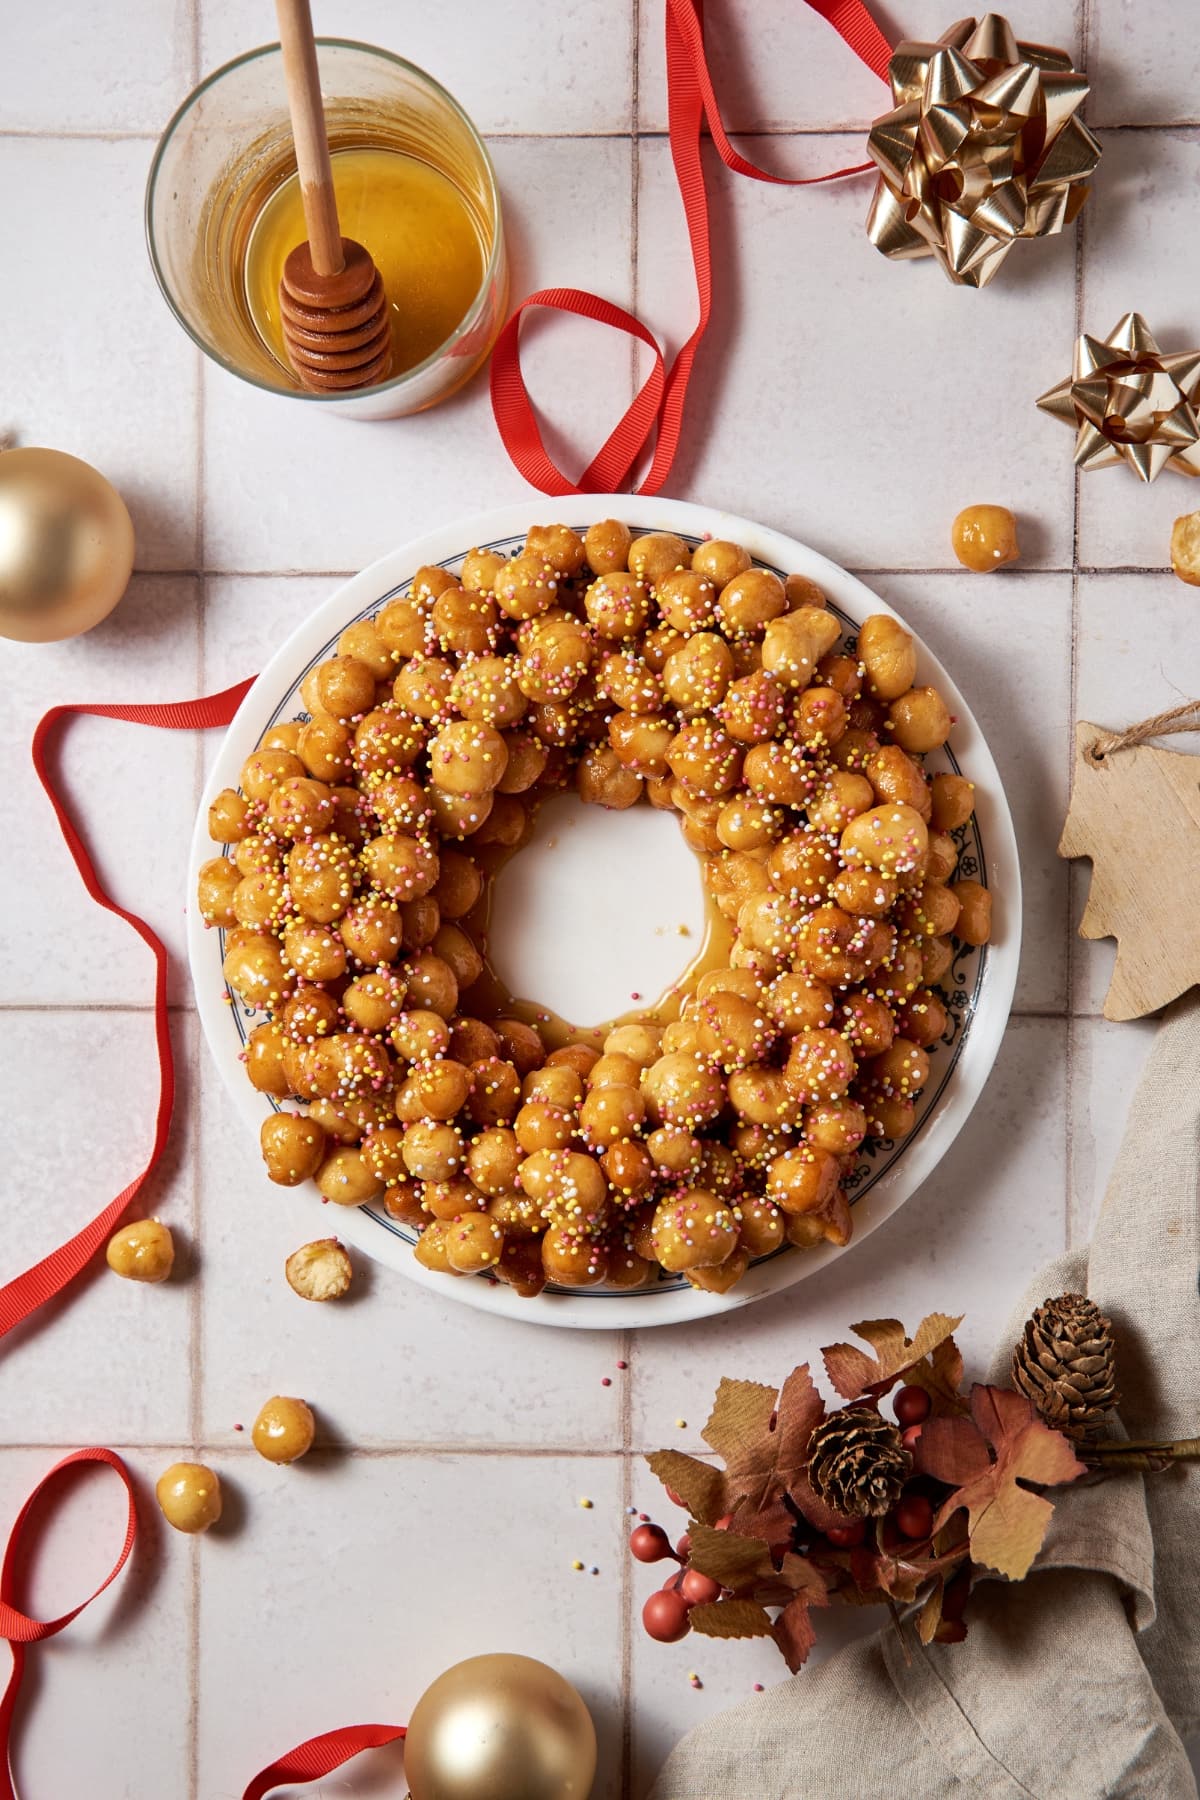 struffoli on a plate with Christmas ornaments surrounding the plate